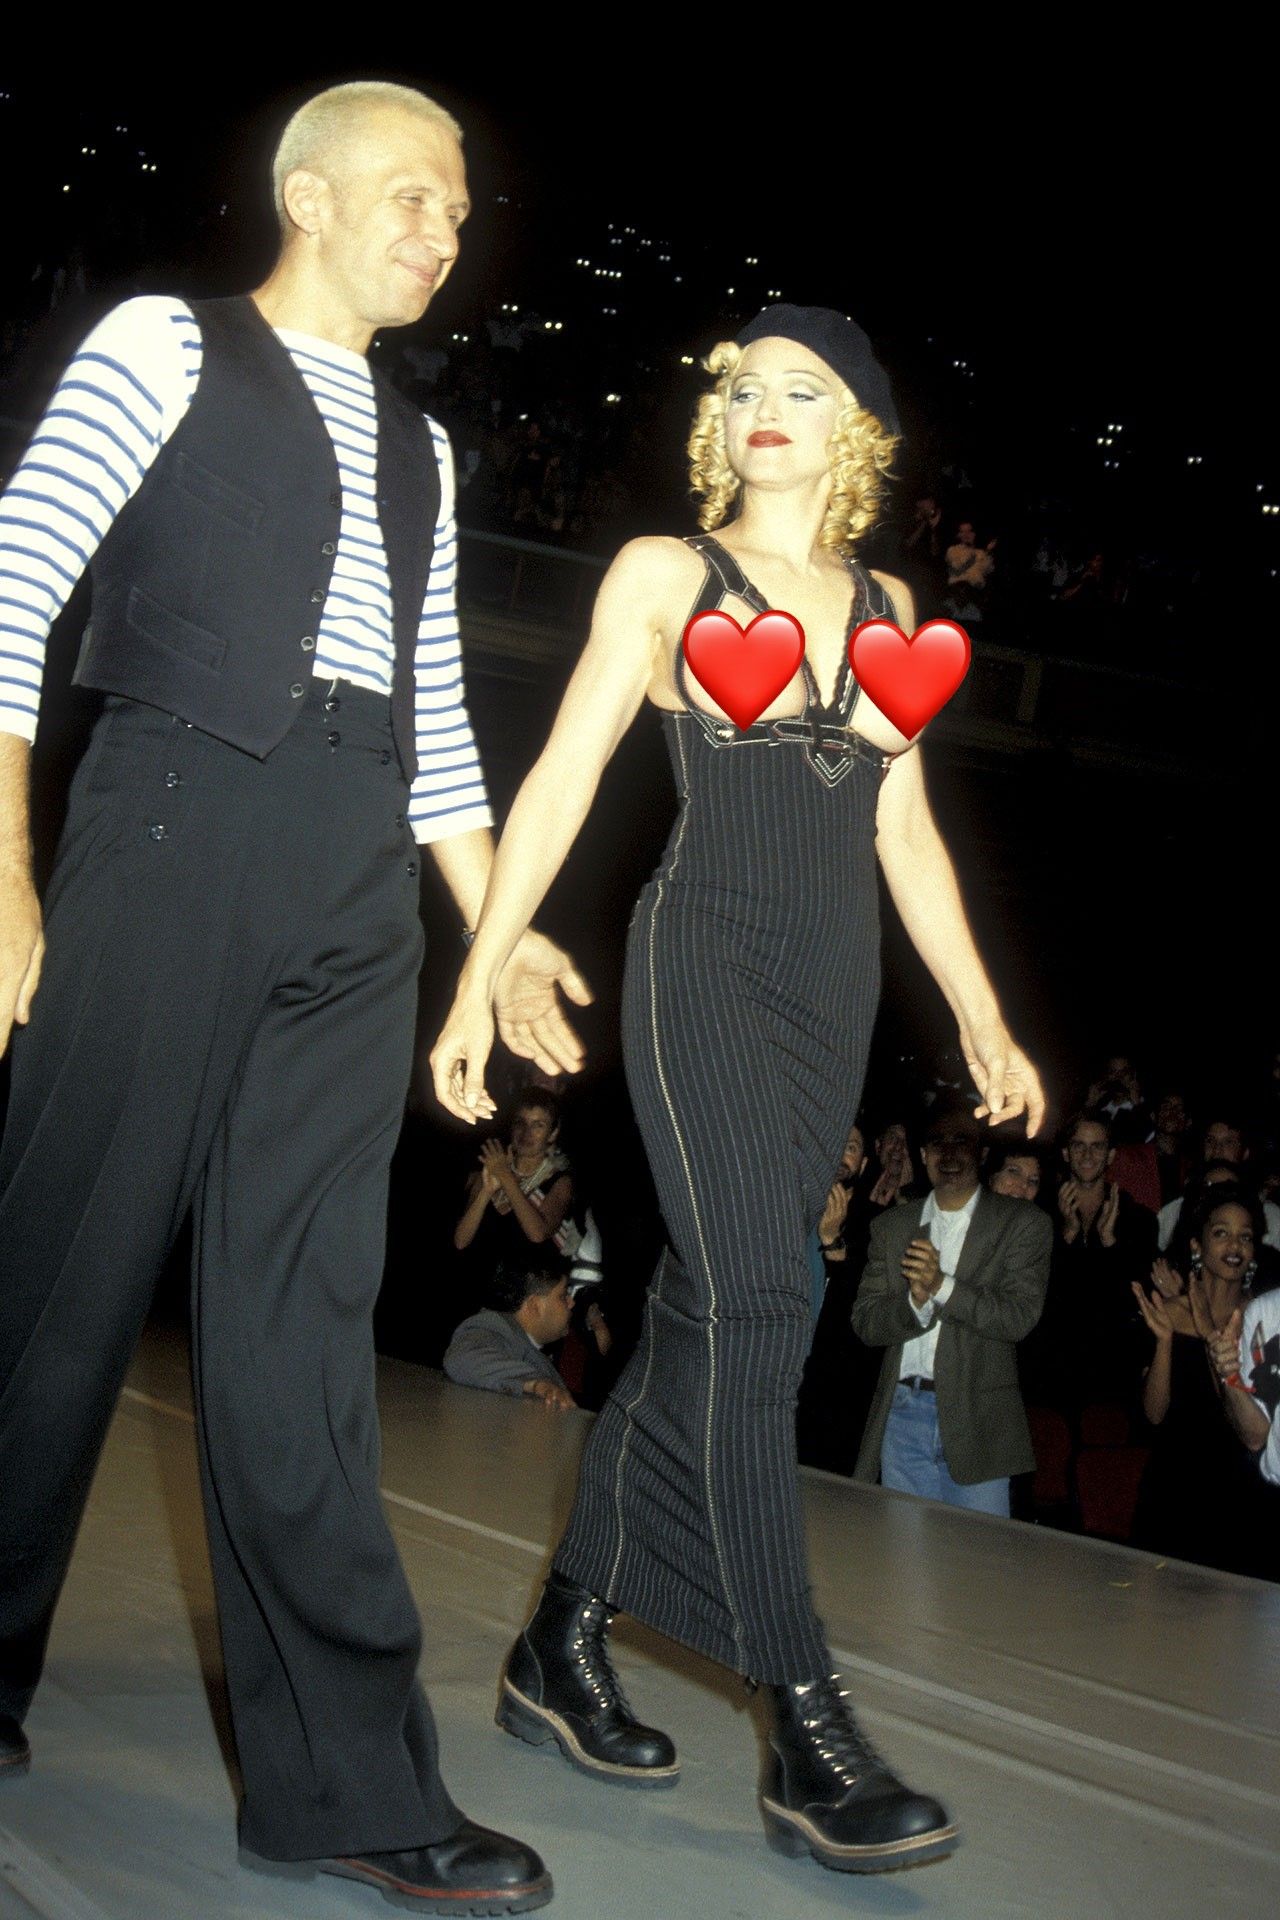 Iconic Fashion Show Moments in the 90s, Some Are Topless